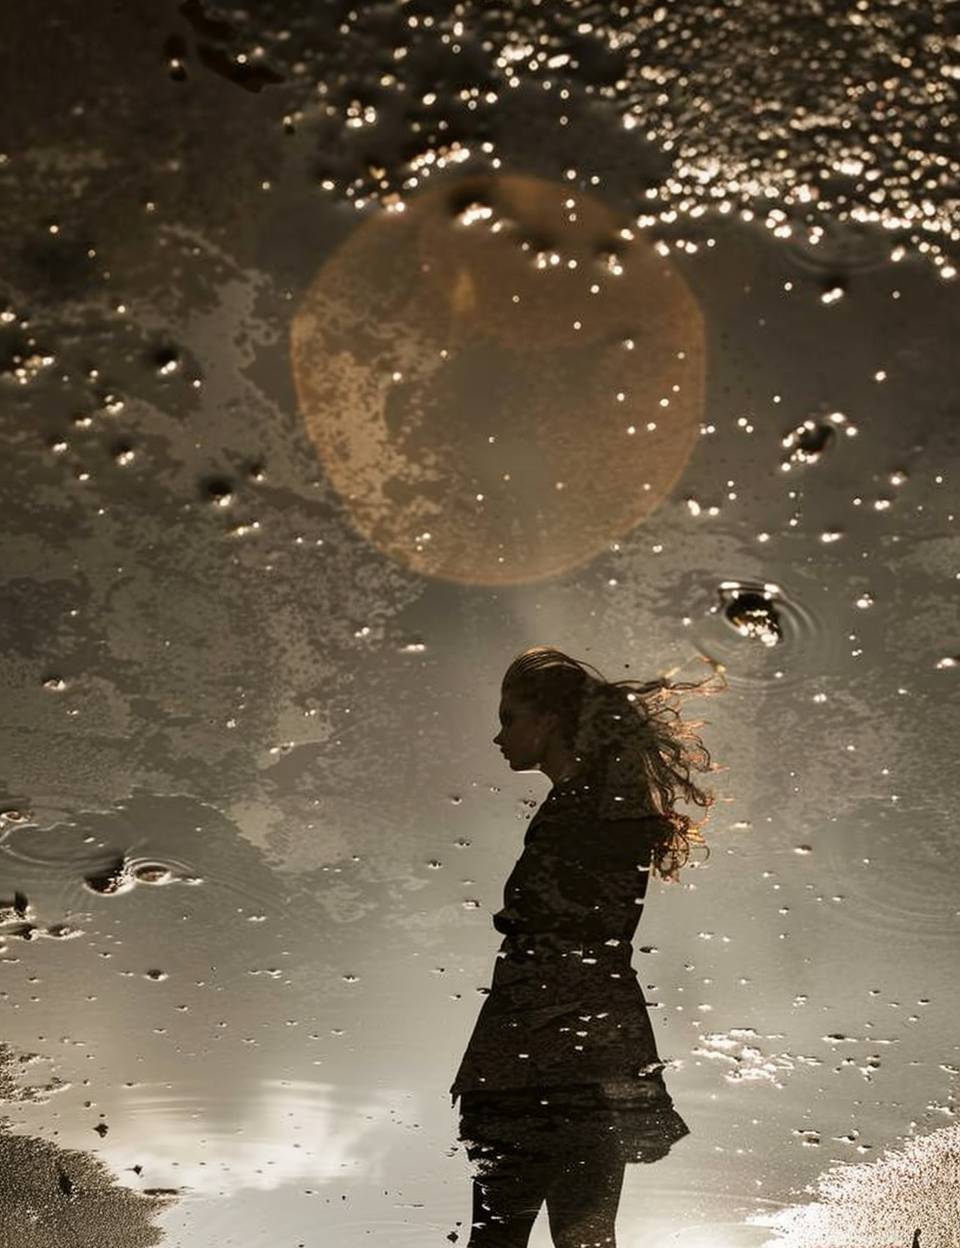 An incredible beautiful woman, as seen in a puddle reflection.